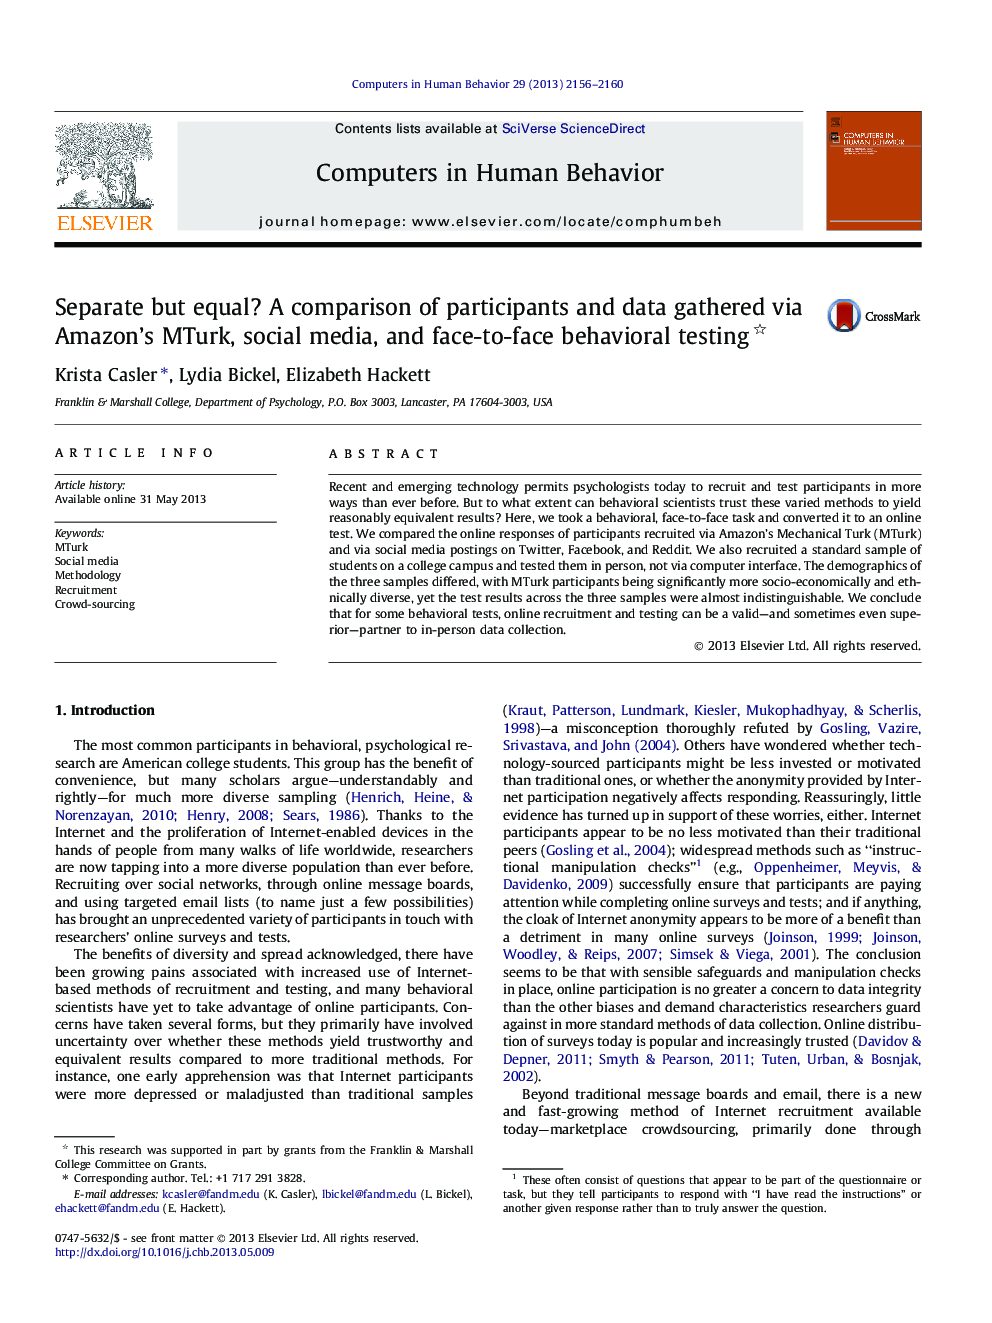 Separate but equal? A comparison of participants and data gathered via Amazon’s MTurk, social media, and face-to-face behavioral testing 